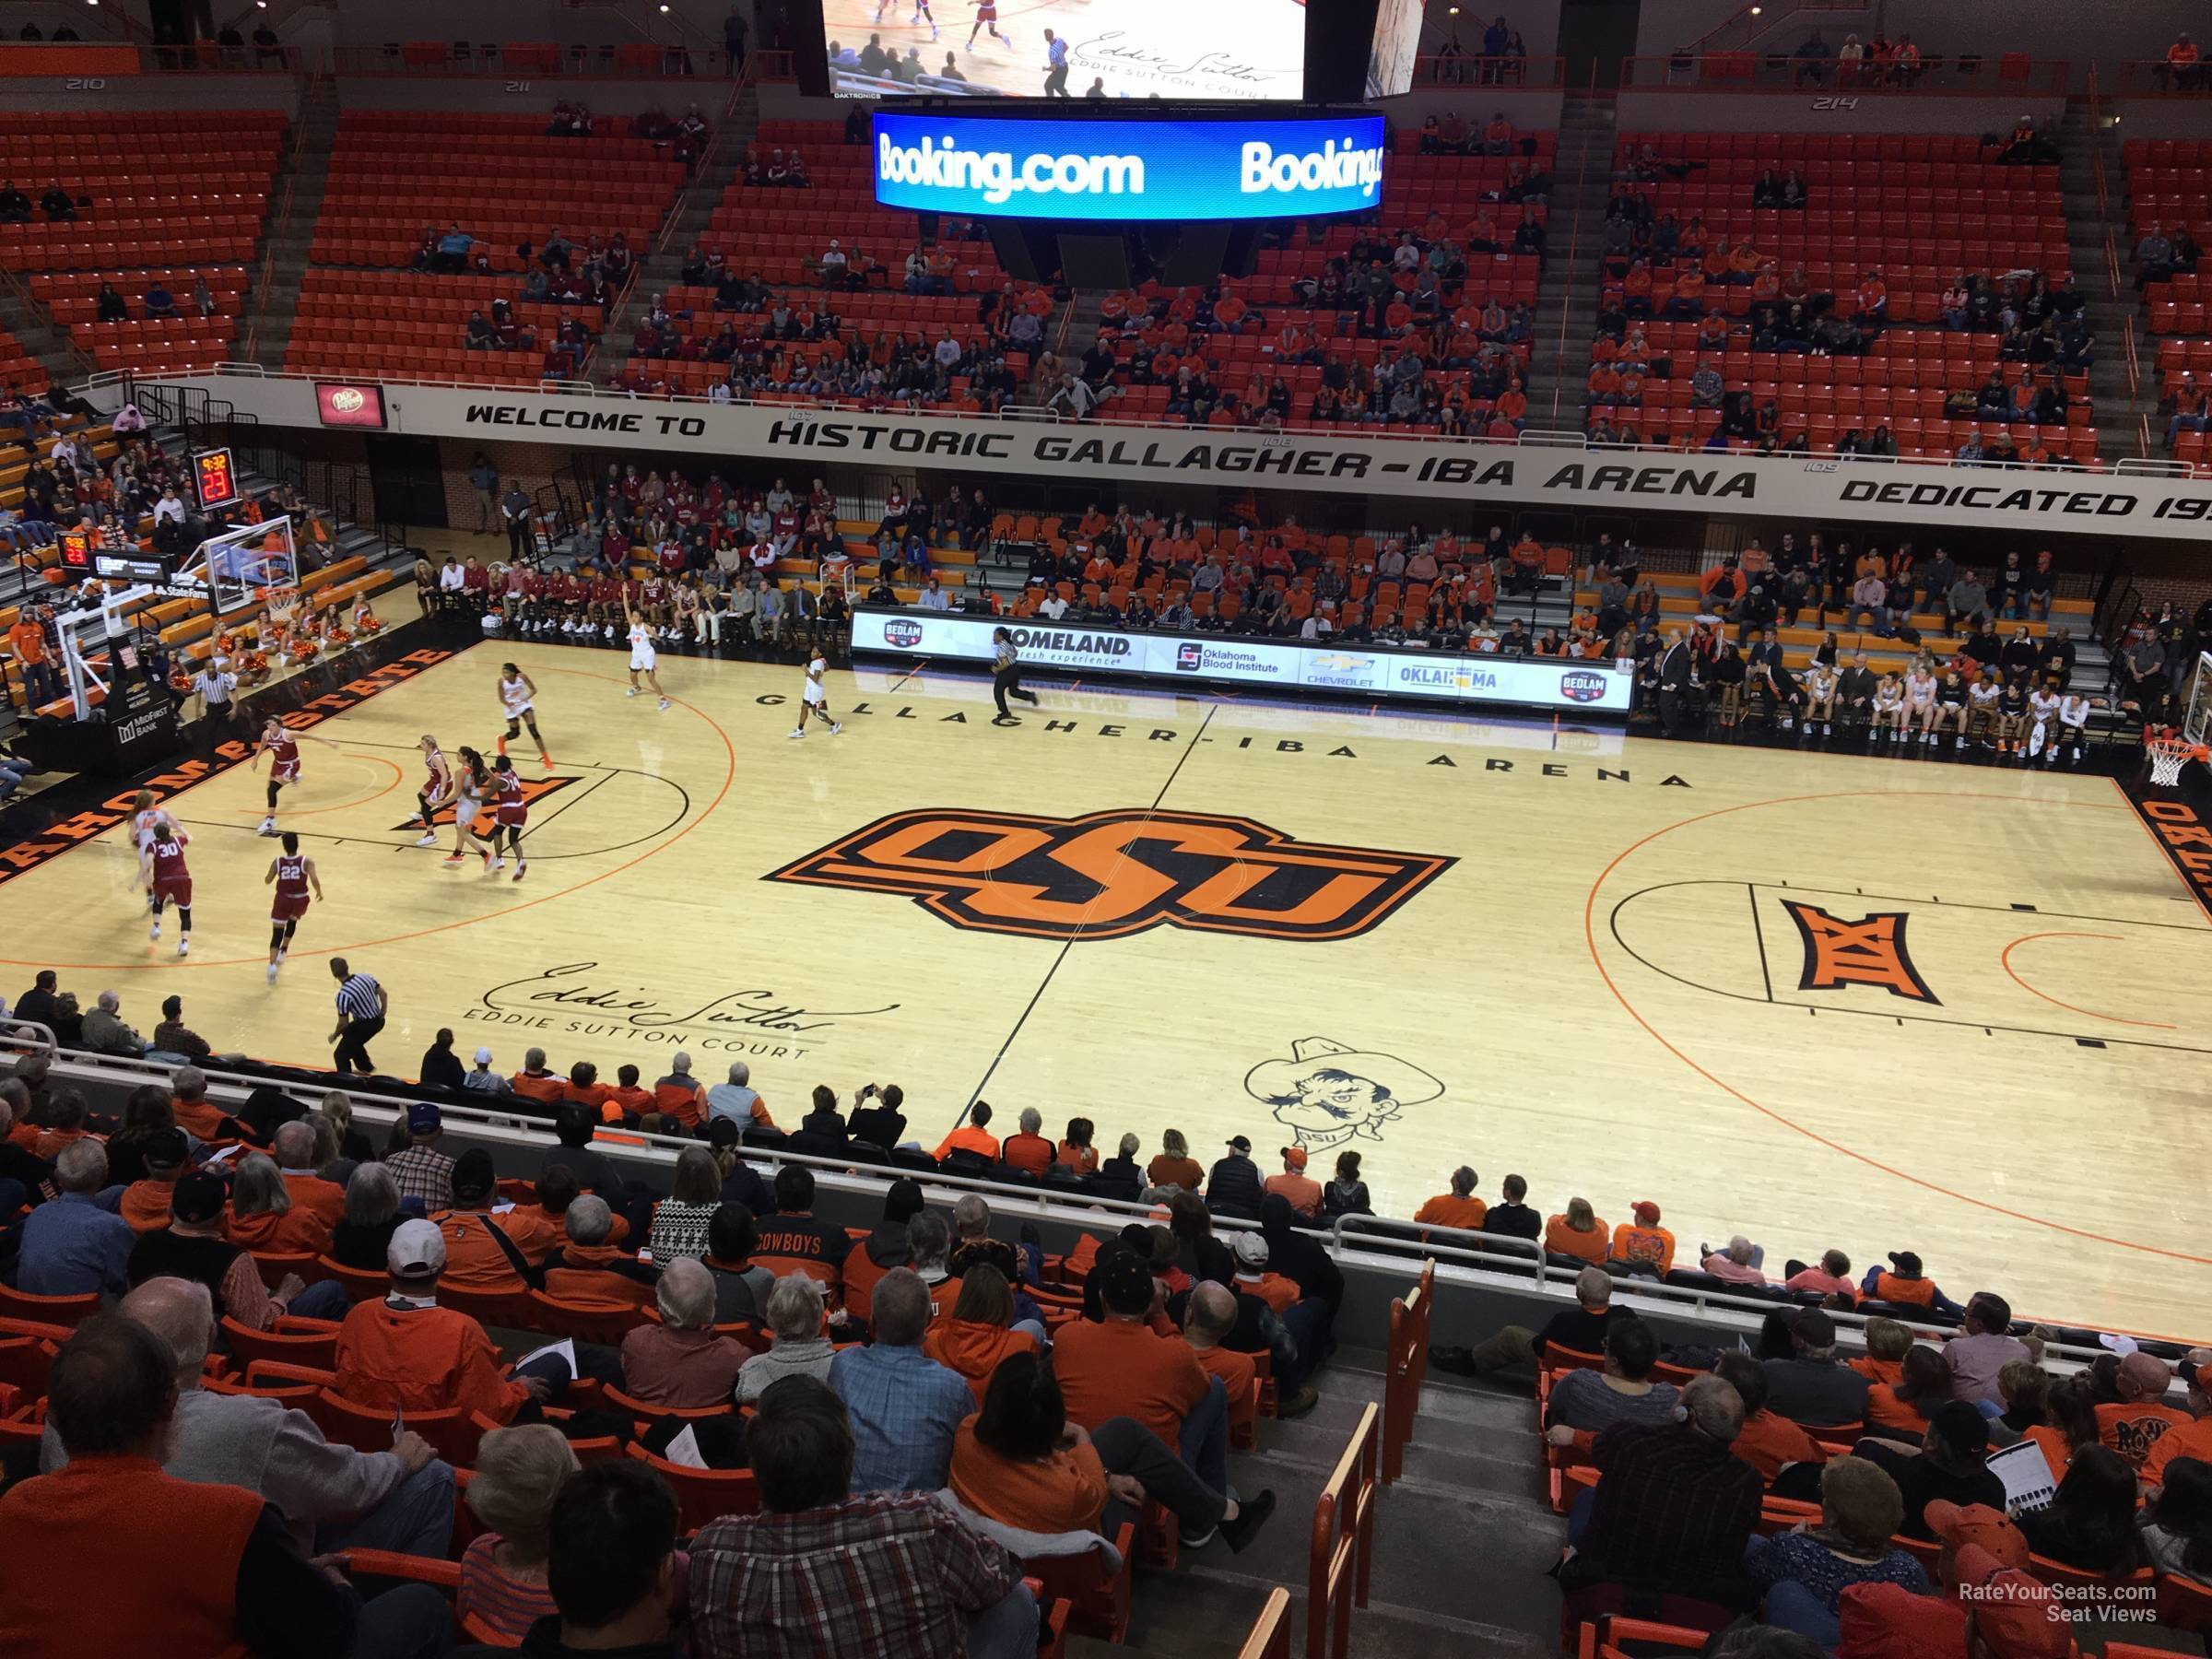 section 202, row 13 seat view  - gallagher-iba arena